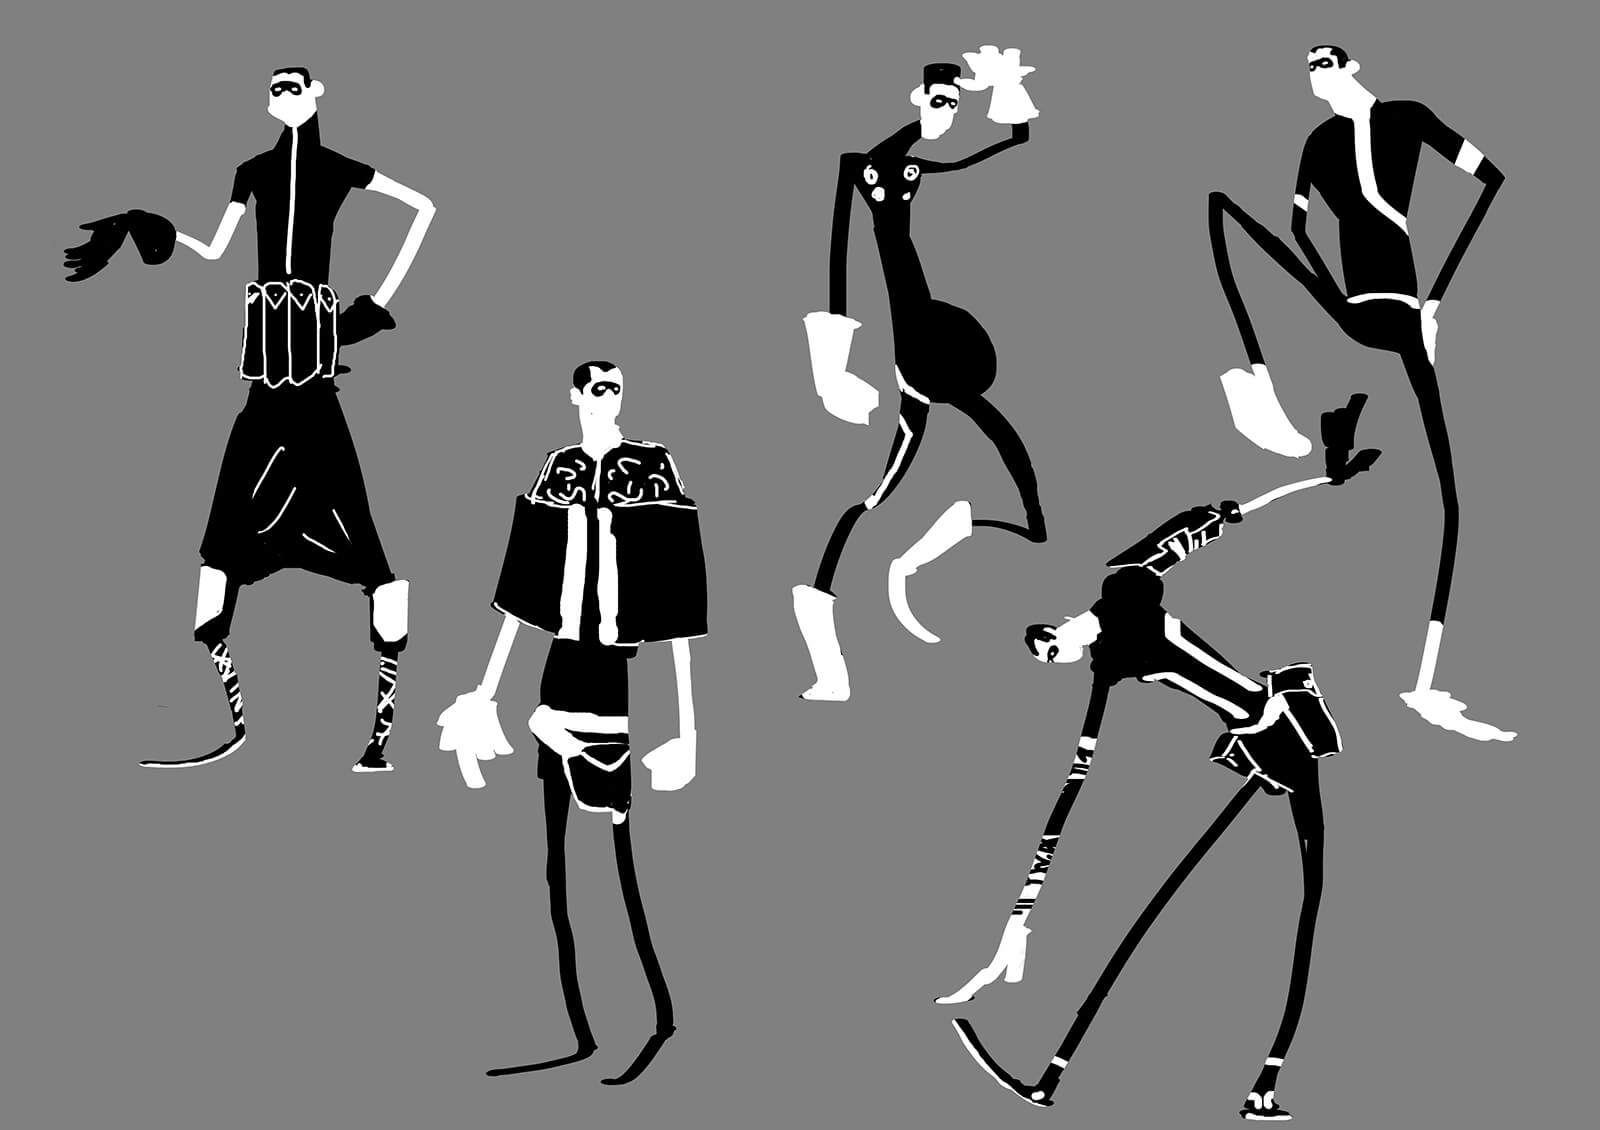 Black-and-white concept sketches or a tall, thin man in various outfits and poses